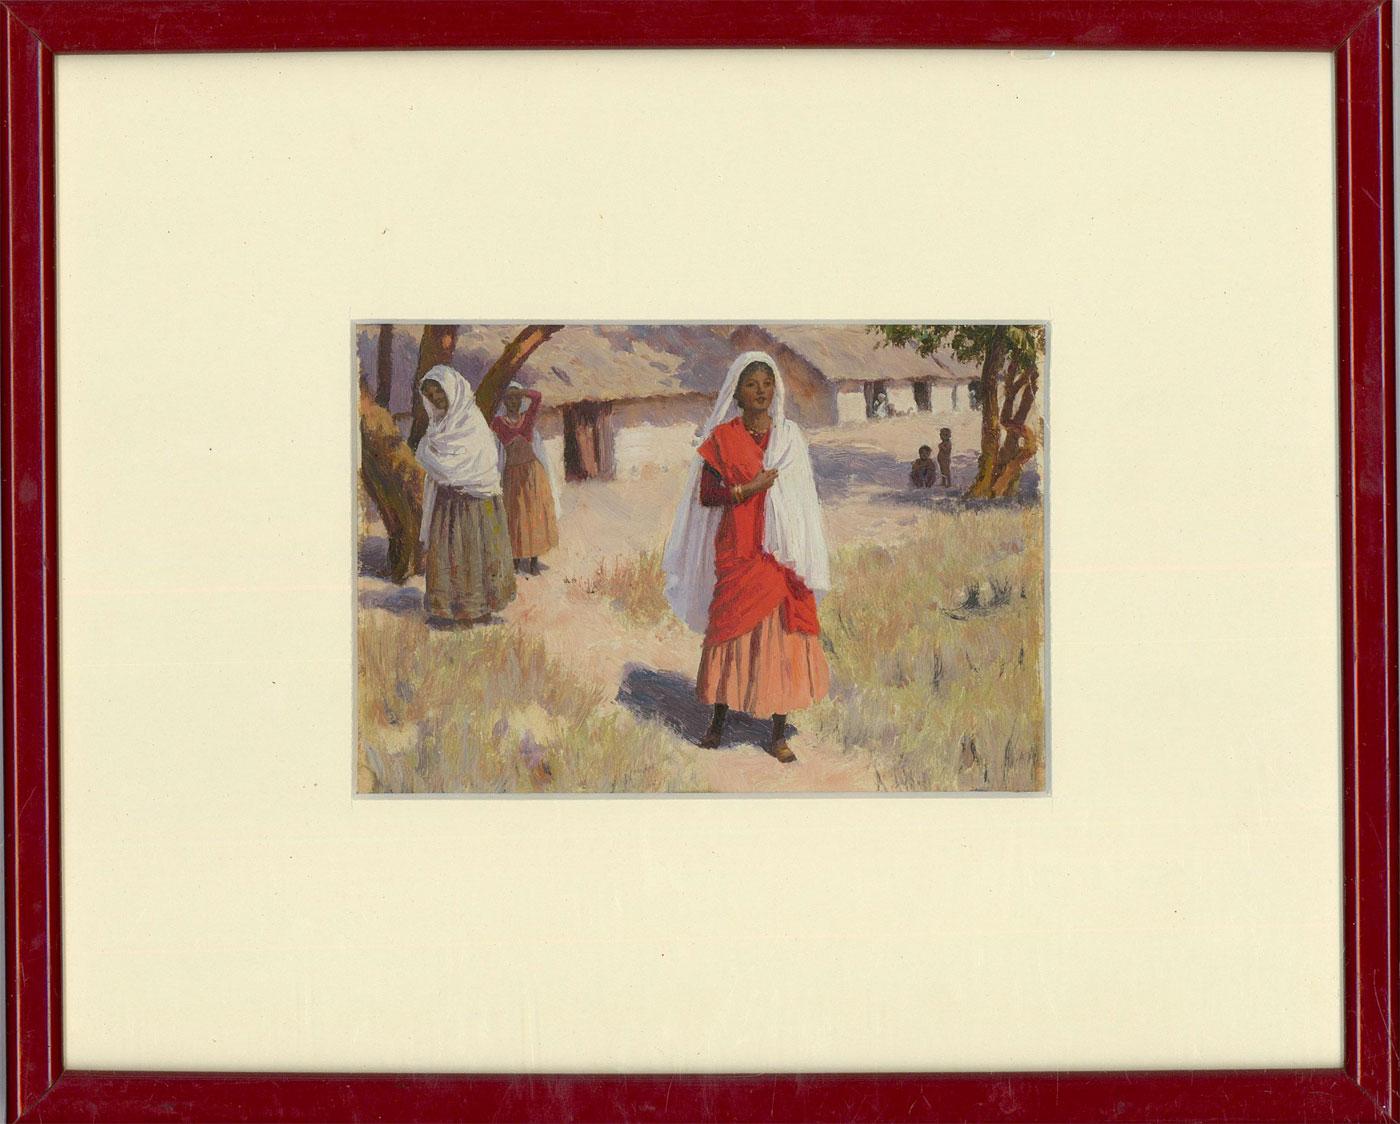 A charming scene depicting a young women walking a path in the afternoon sun. Figures behind her stand beneath a tree shading themselves from the heat. Part of a pair of Eastern scenes. Unsigned. Presented in a lacquer frame. On board.
